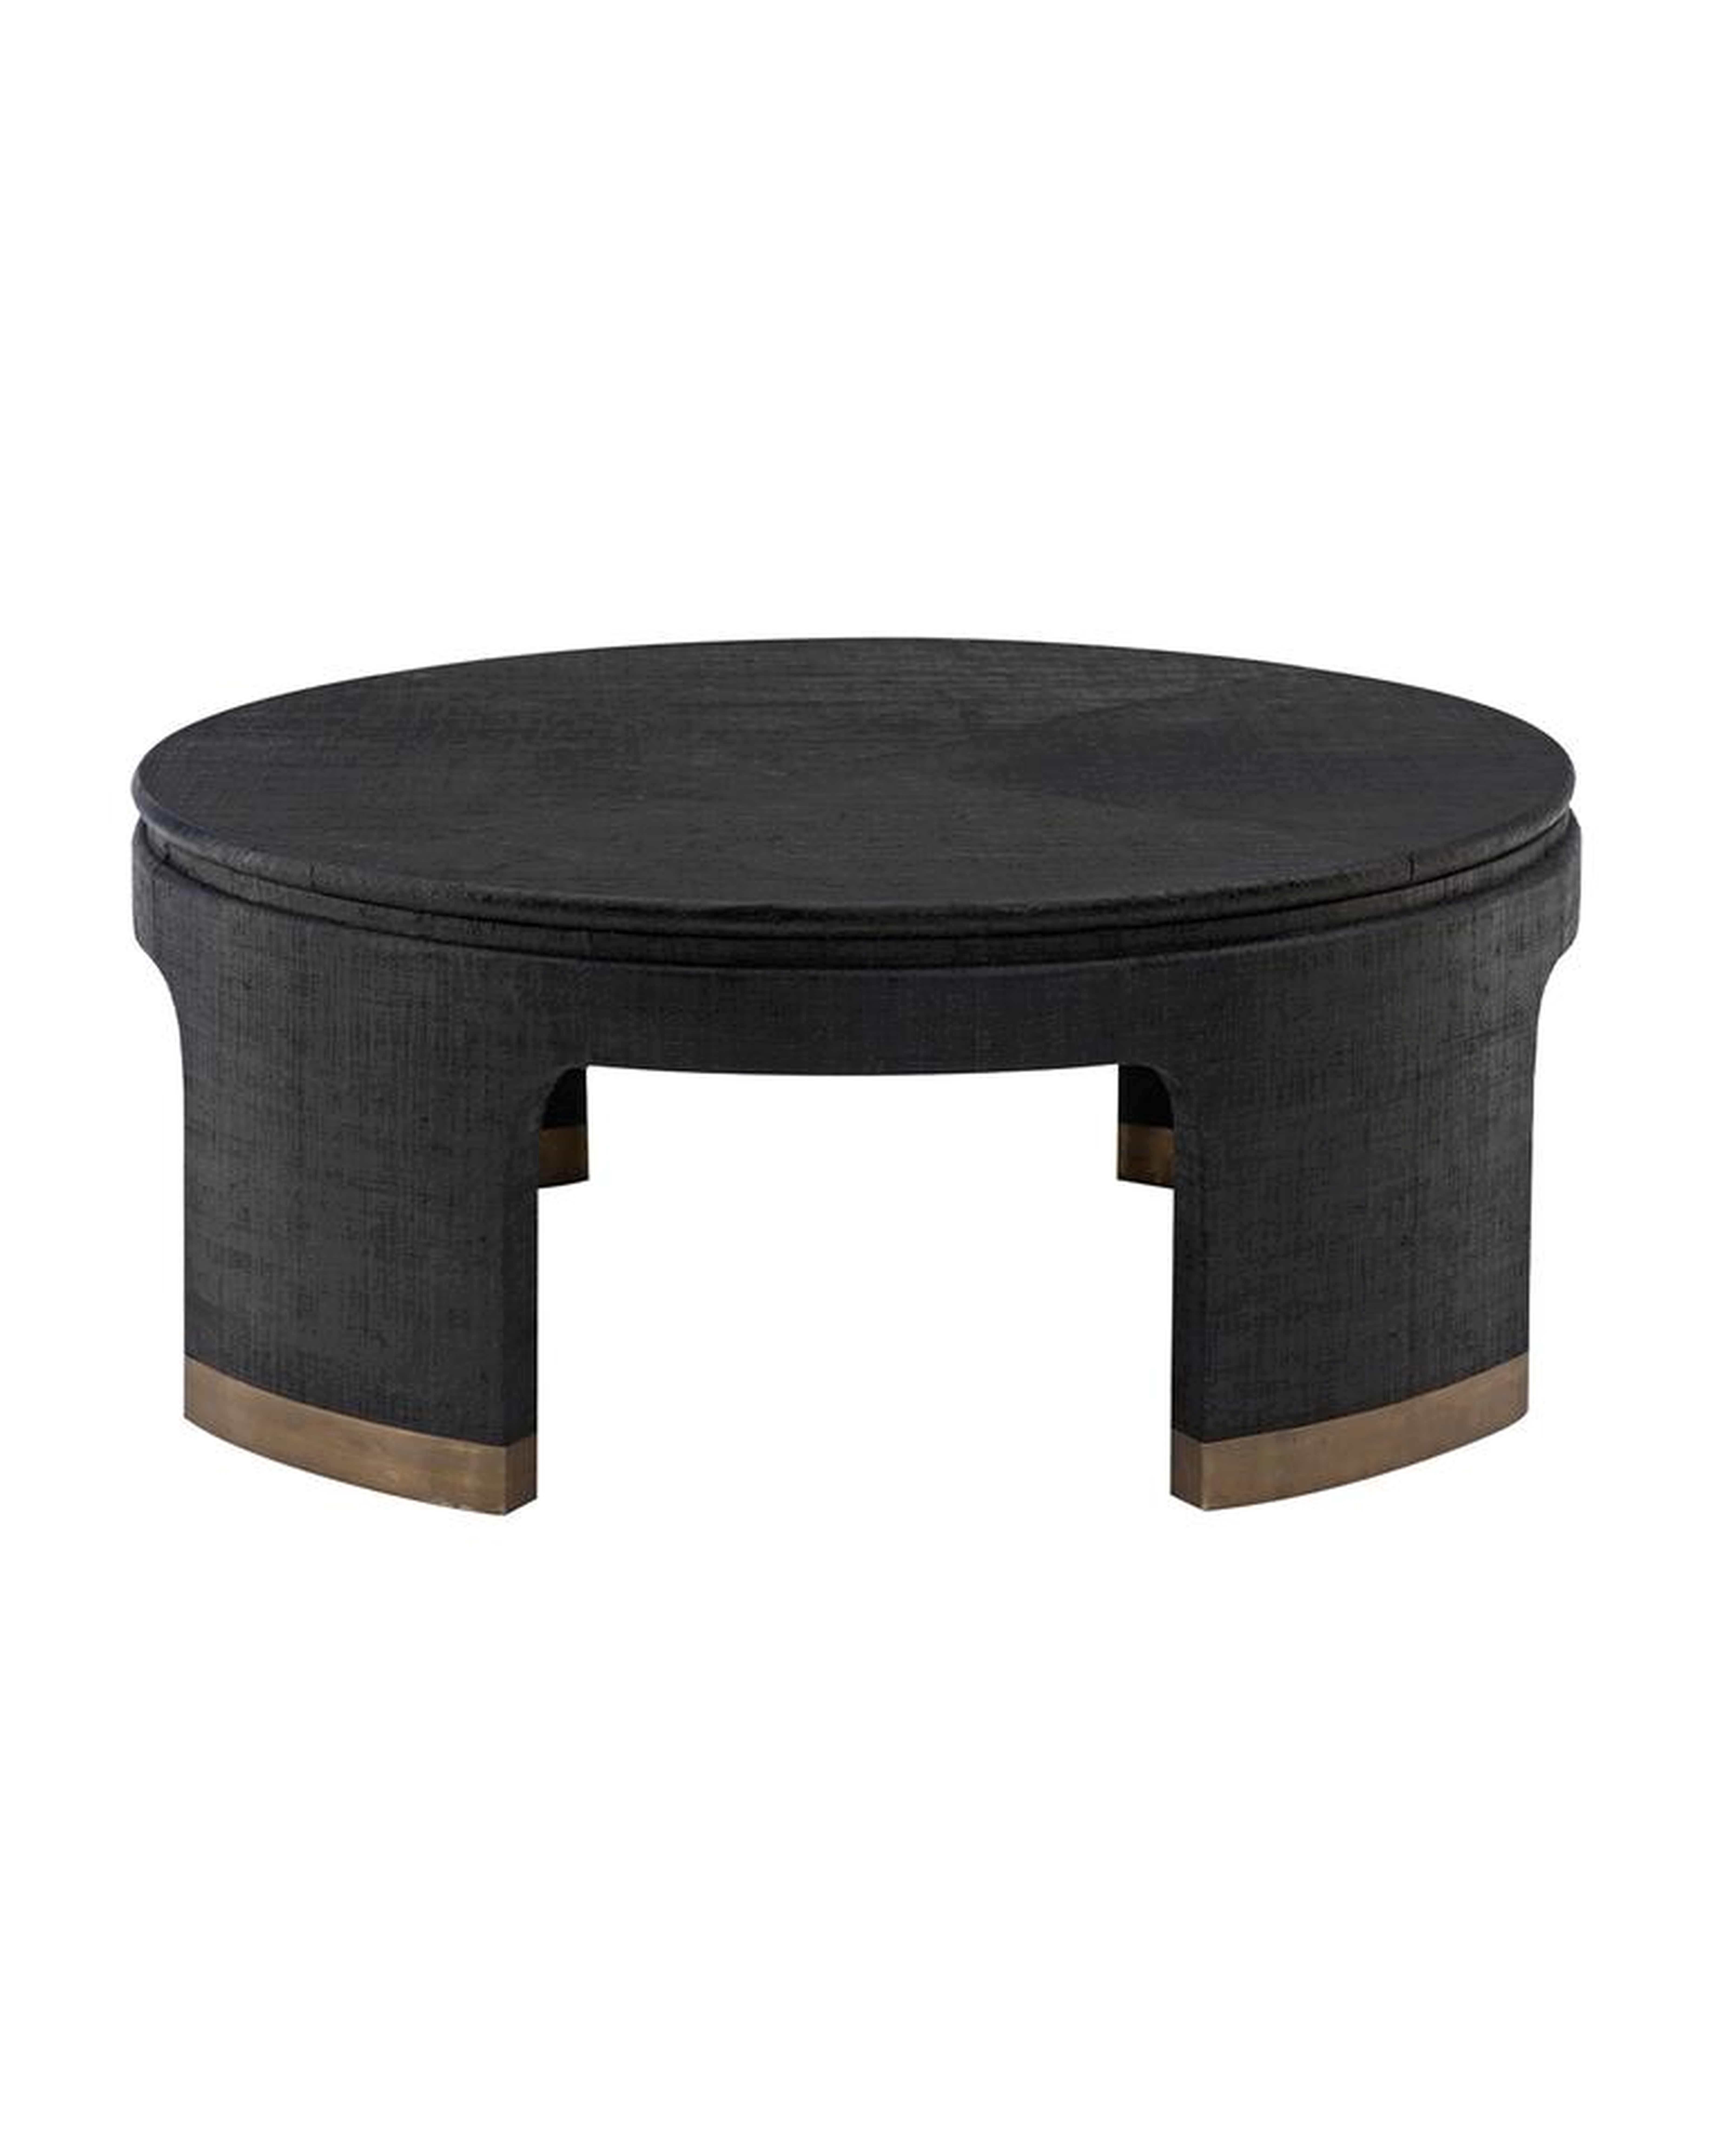 THUNELL COFFEE TABLE - McGee & Co.